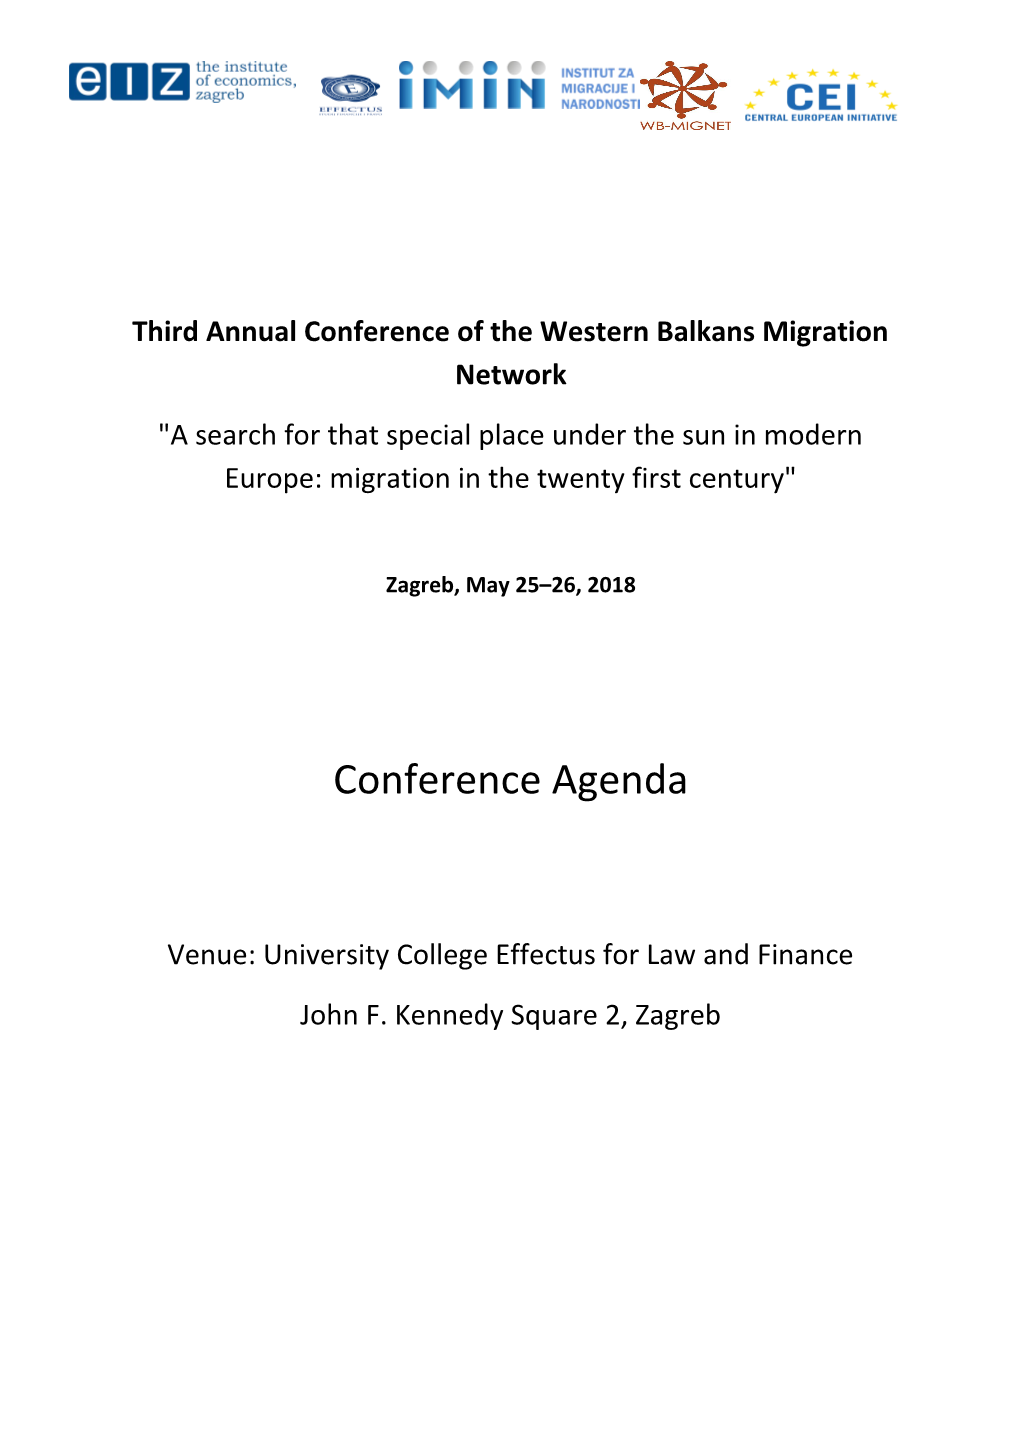 Third Annual Conference of the Western Balkans Migration Network